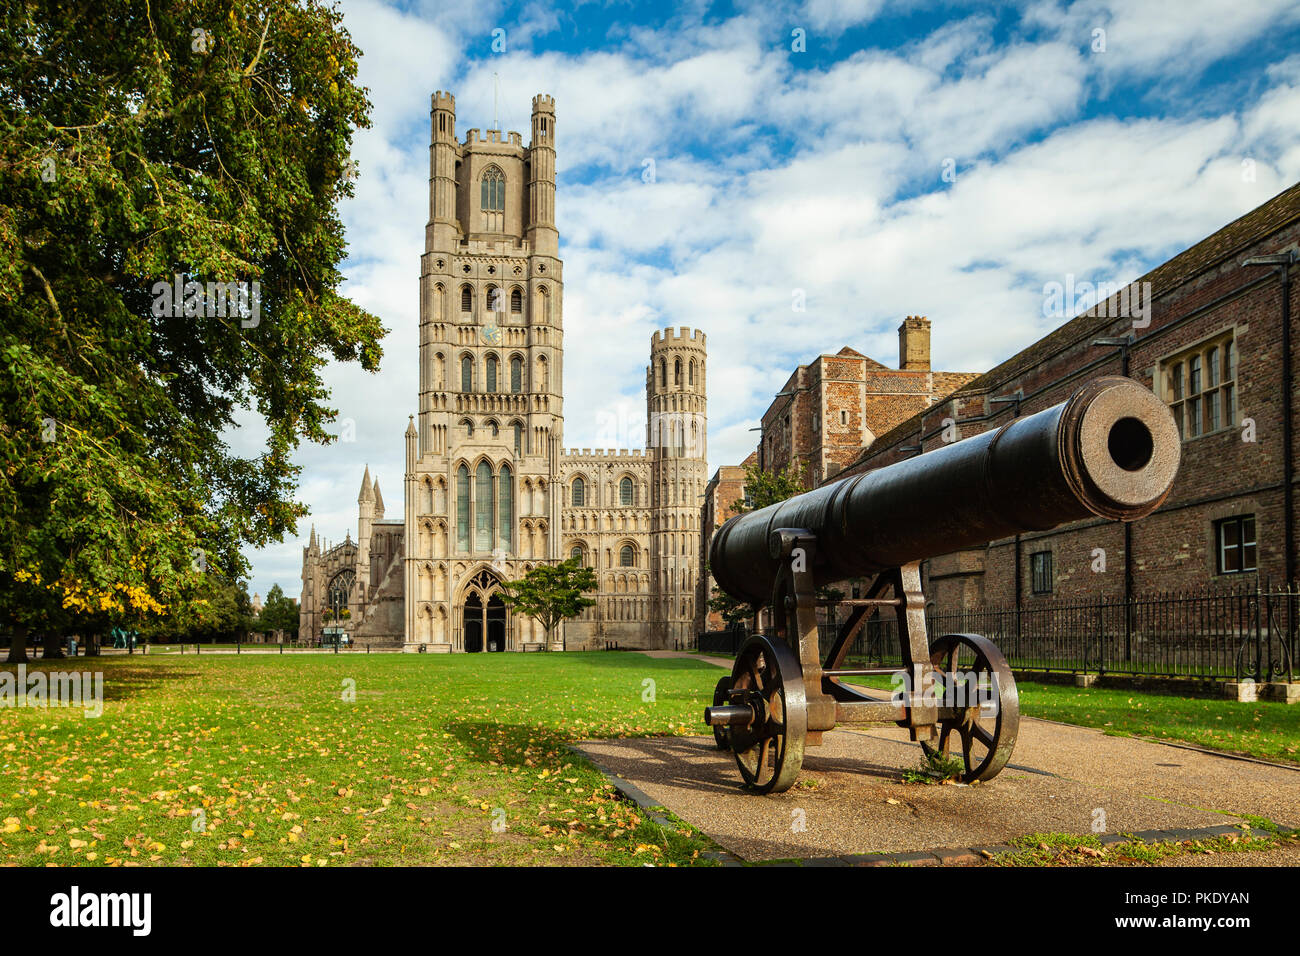 Afternoon at Ely cathedral, Cambridgeshire, England. Stock Photo